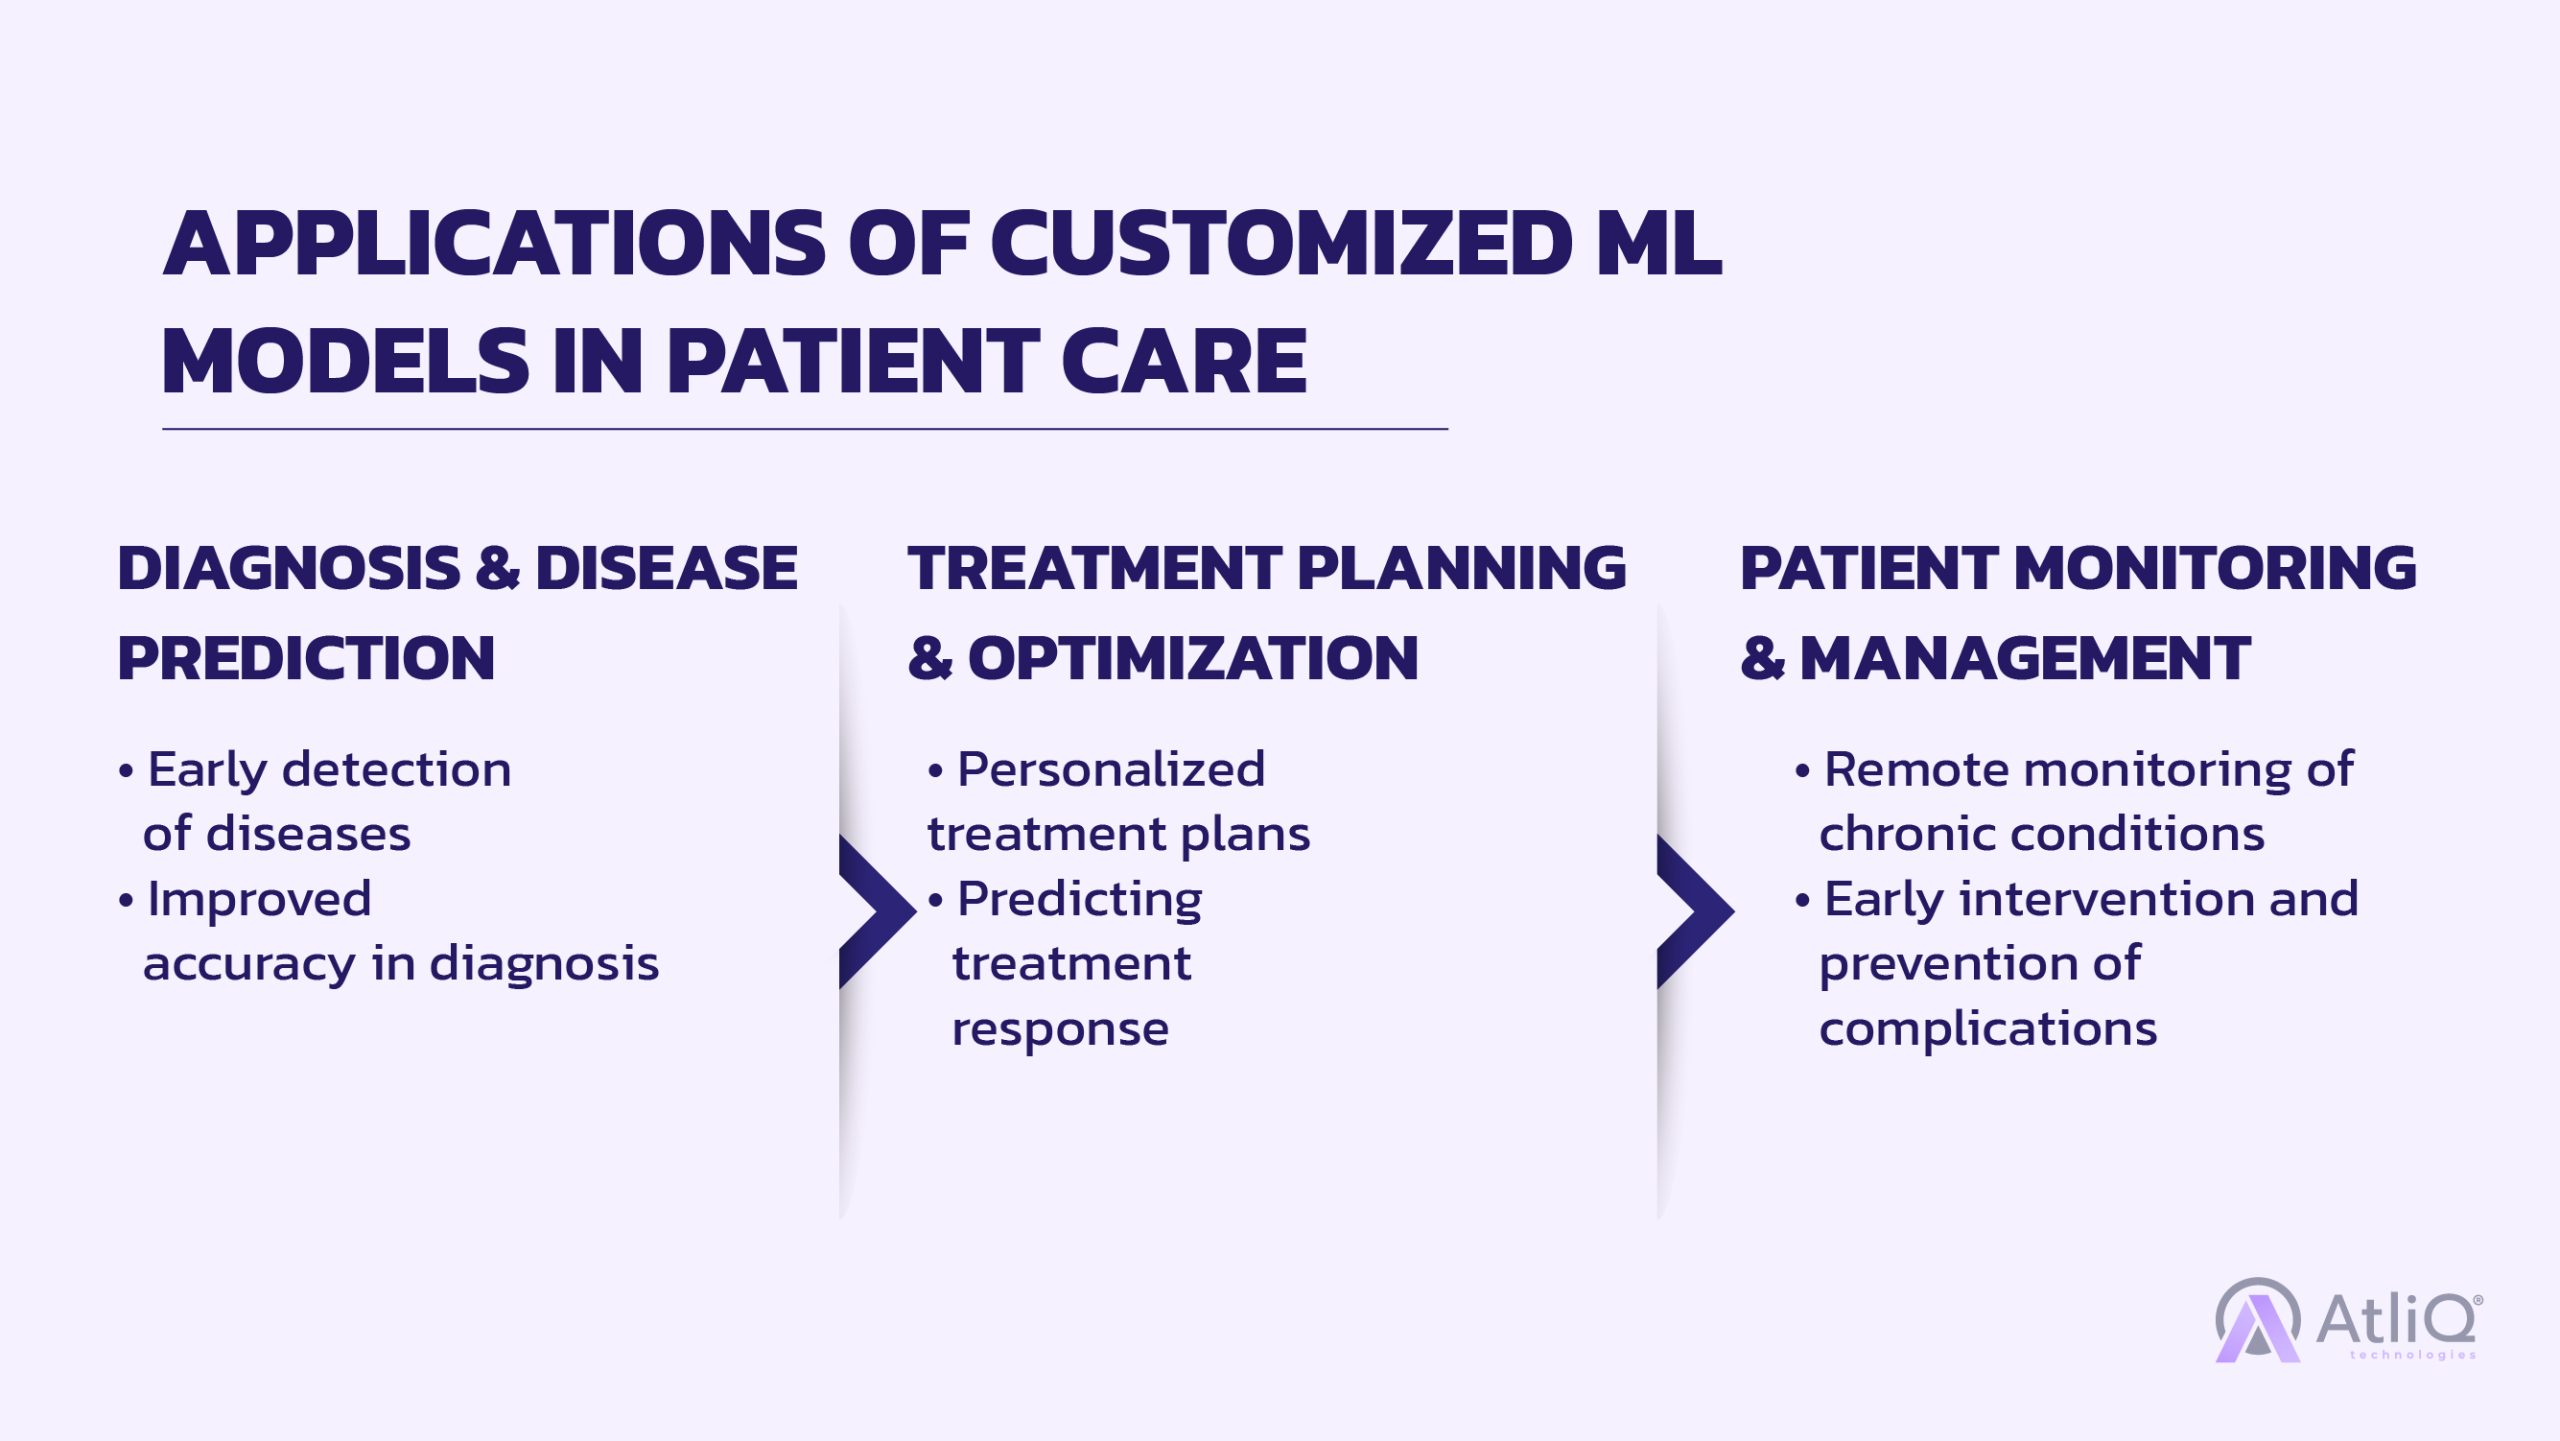 APPLICATIONS OF CUSTOMIZED ML MODELS IN PATIENT CARE